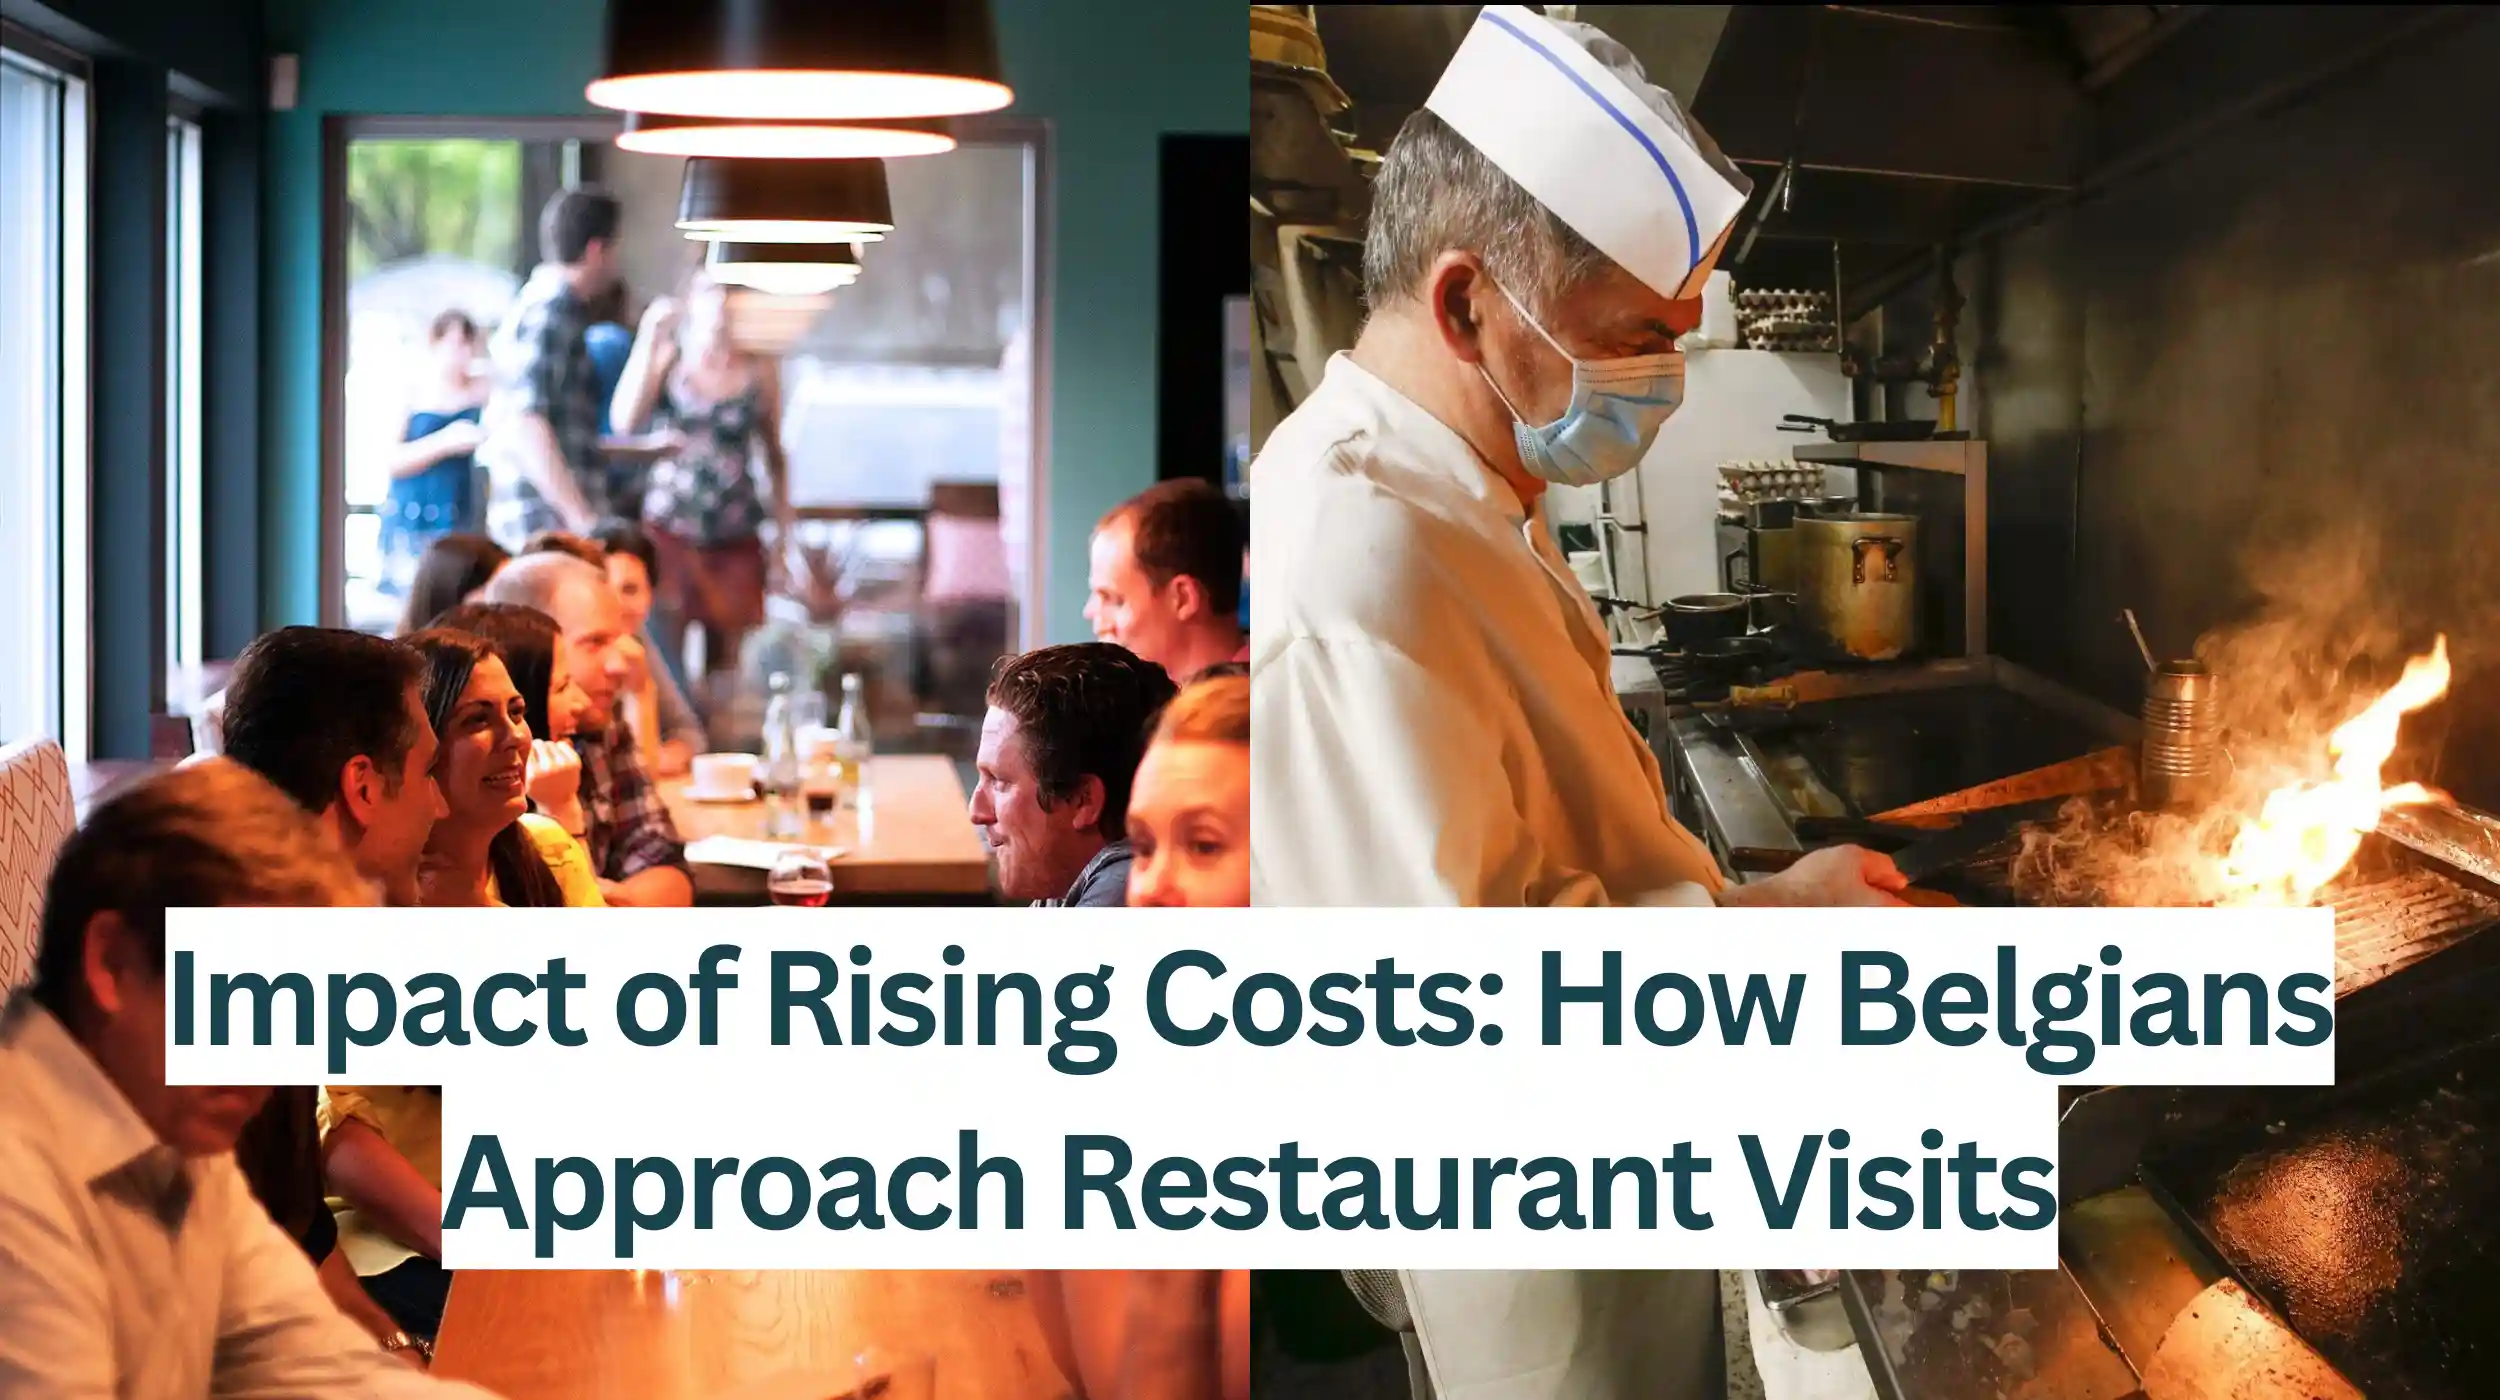 mpact-of-Rising-Costs-How-Belgians-Approach-Restaurant-Visits